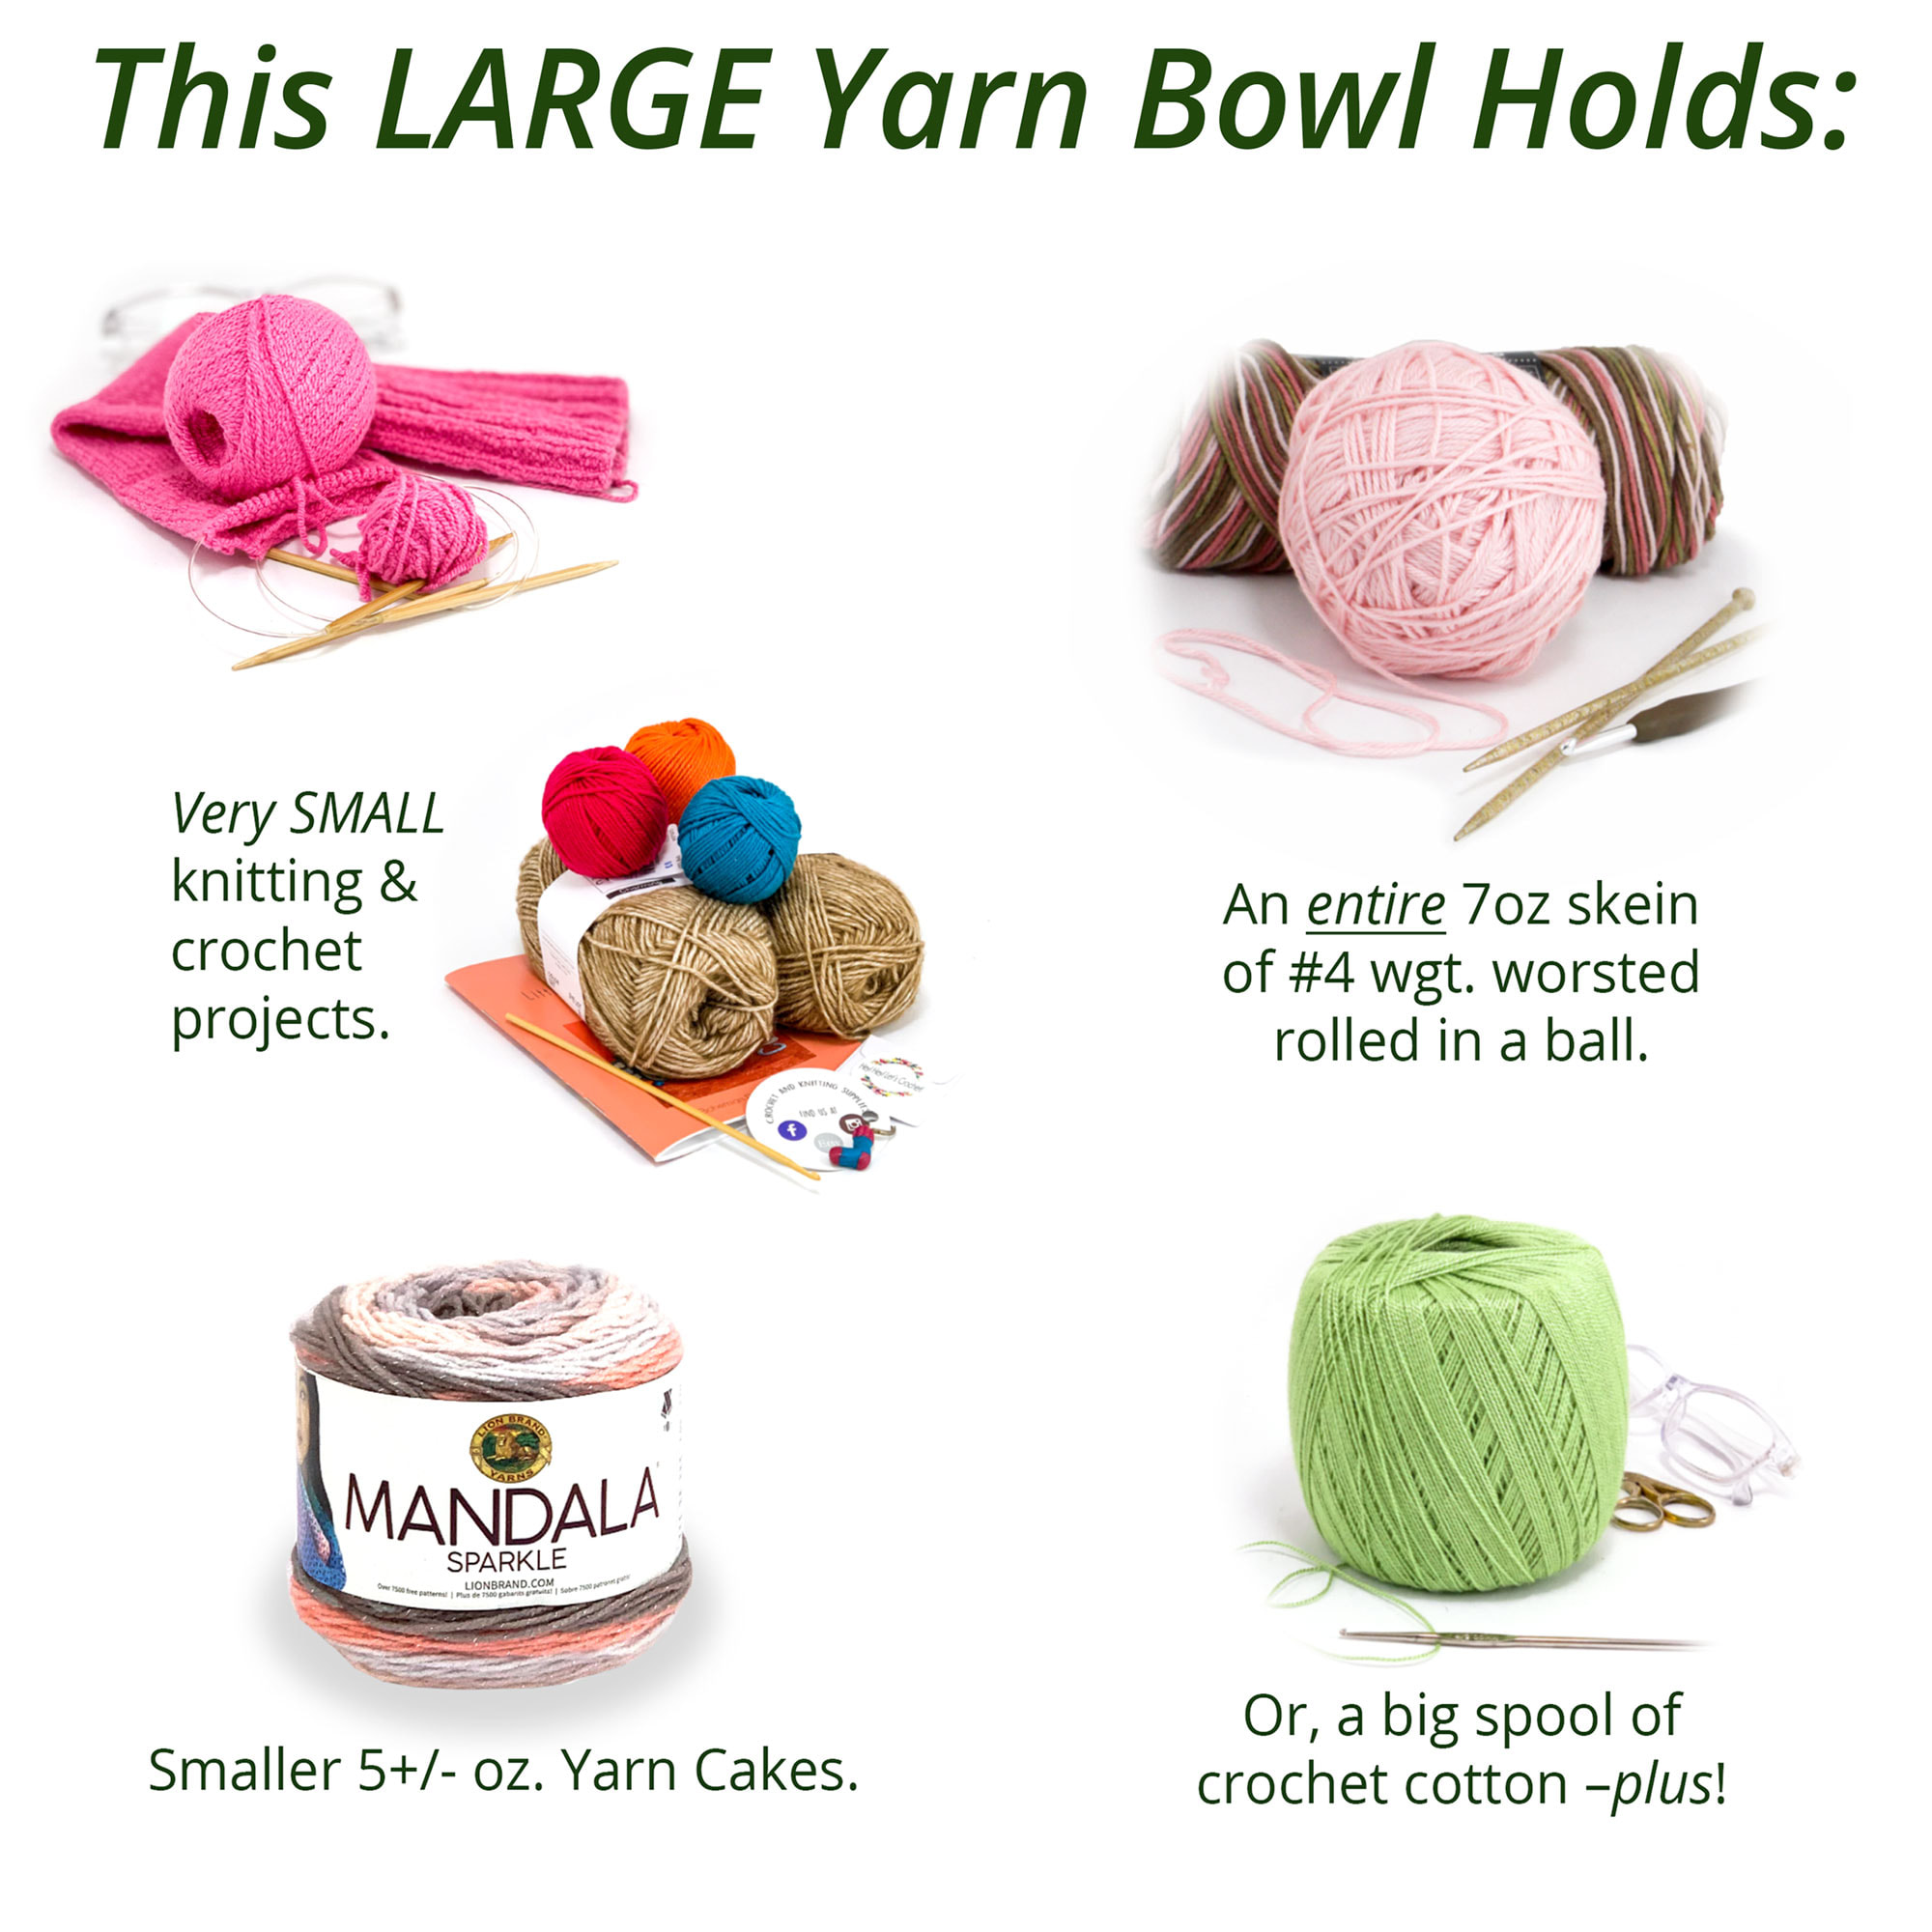 Crochet Yarn Bowl: Pros and Cons